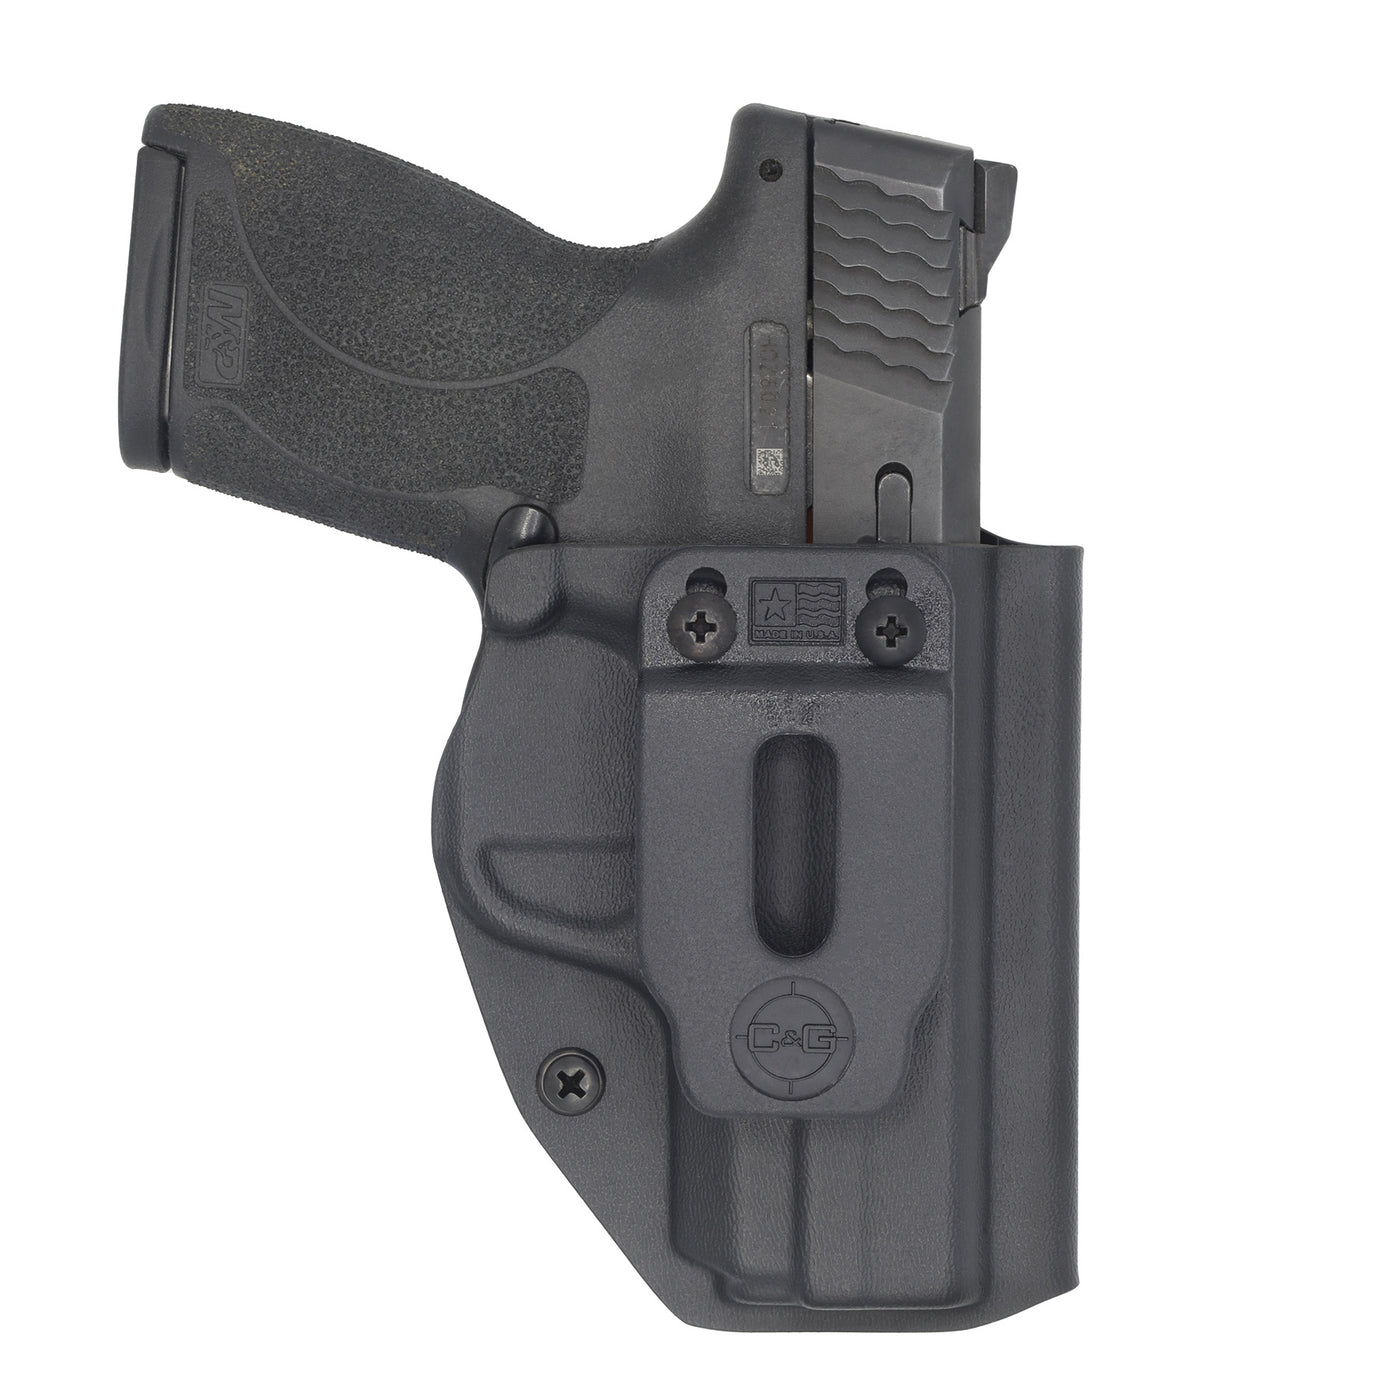 C&G Holsters quick ship Covert IWB kydex holster for Smith & Wesson M&P Shield 45 in black holstered